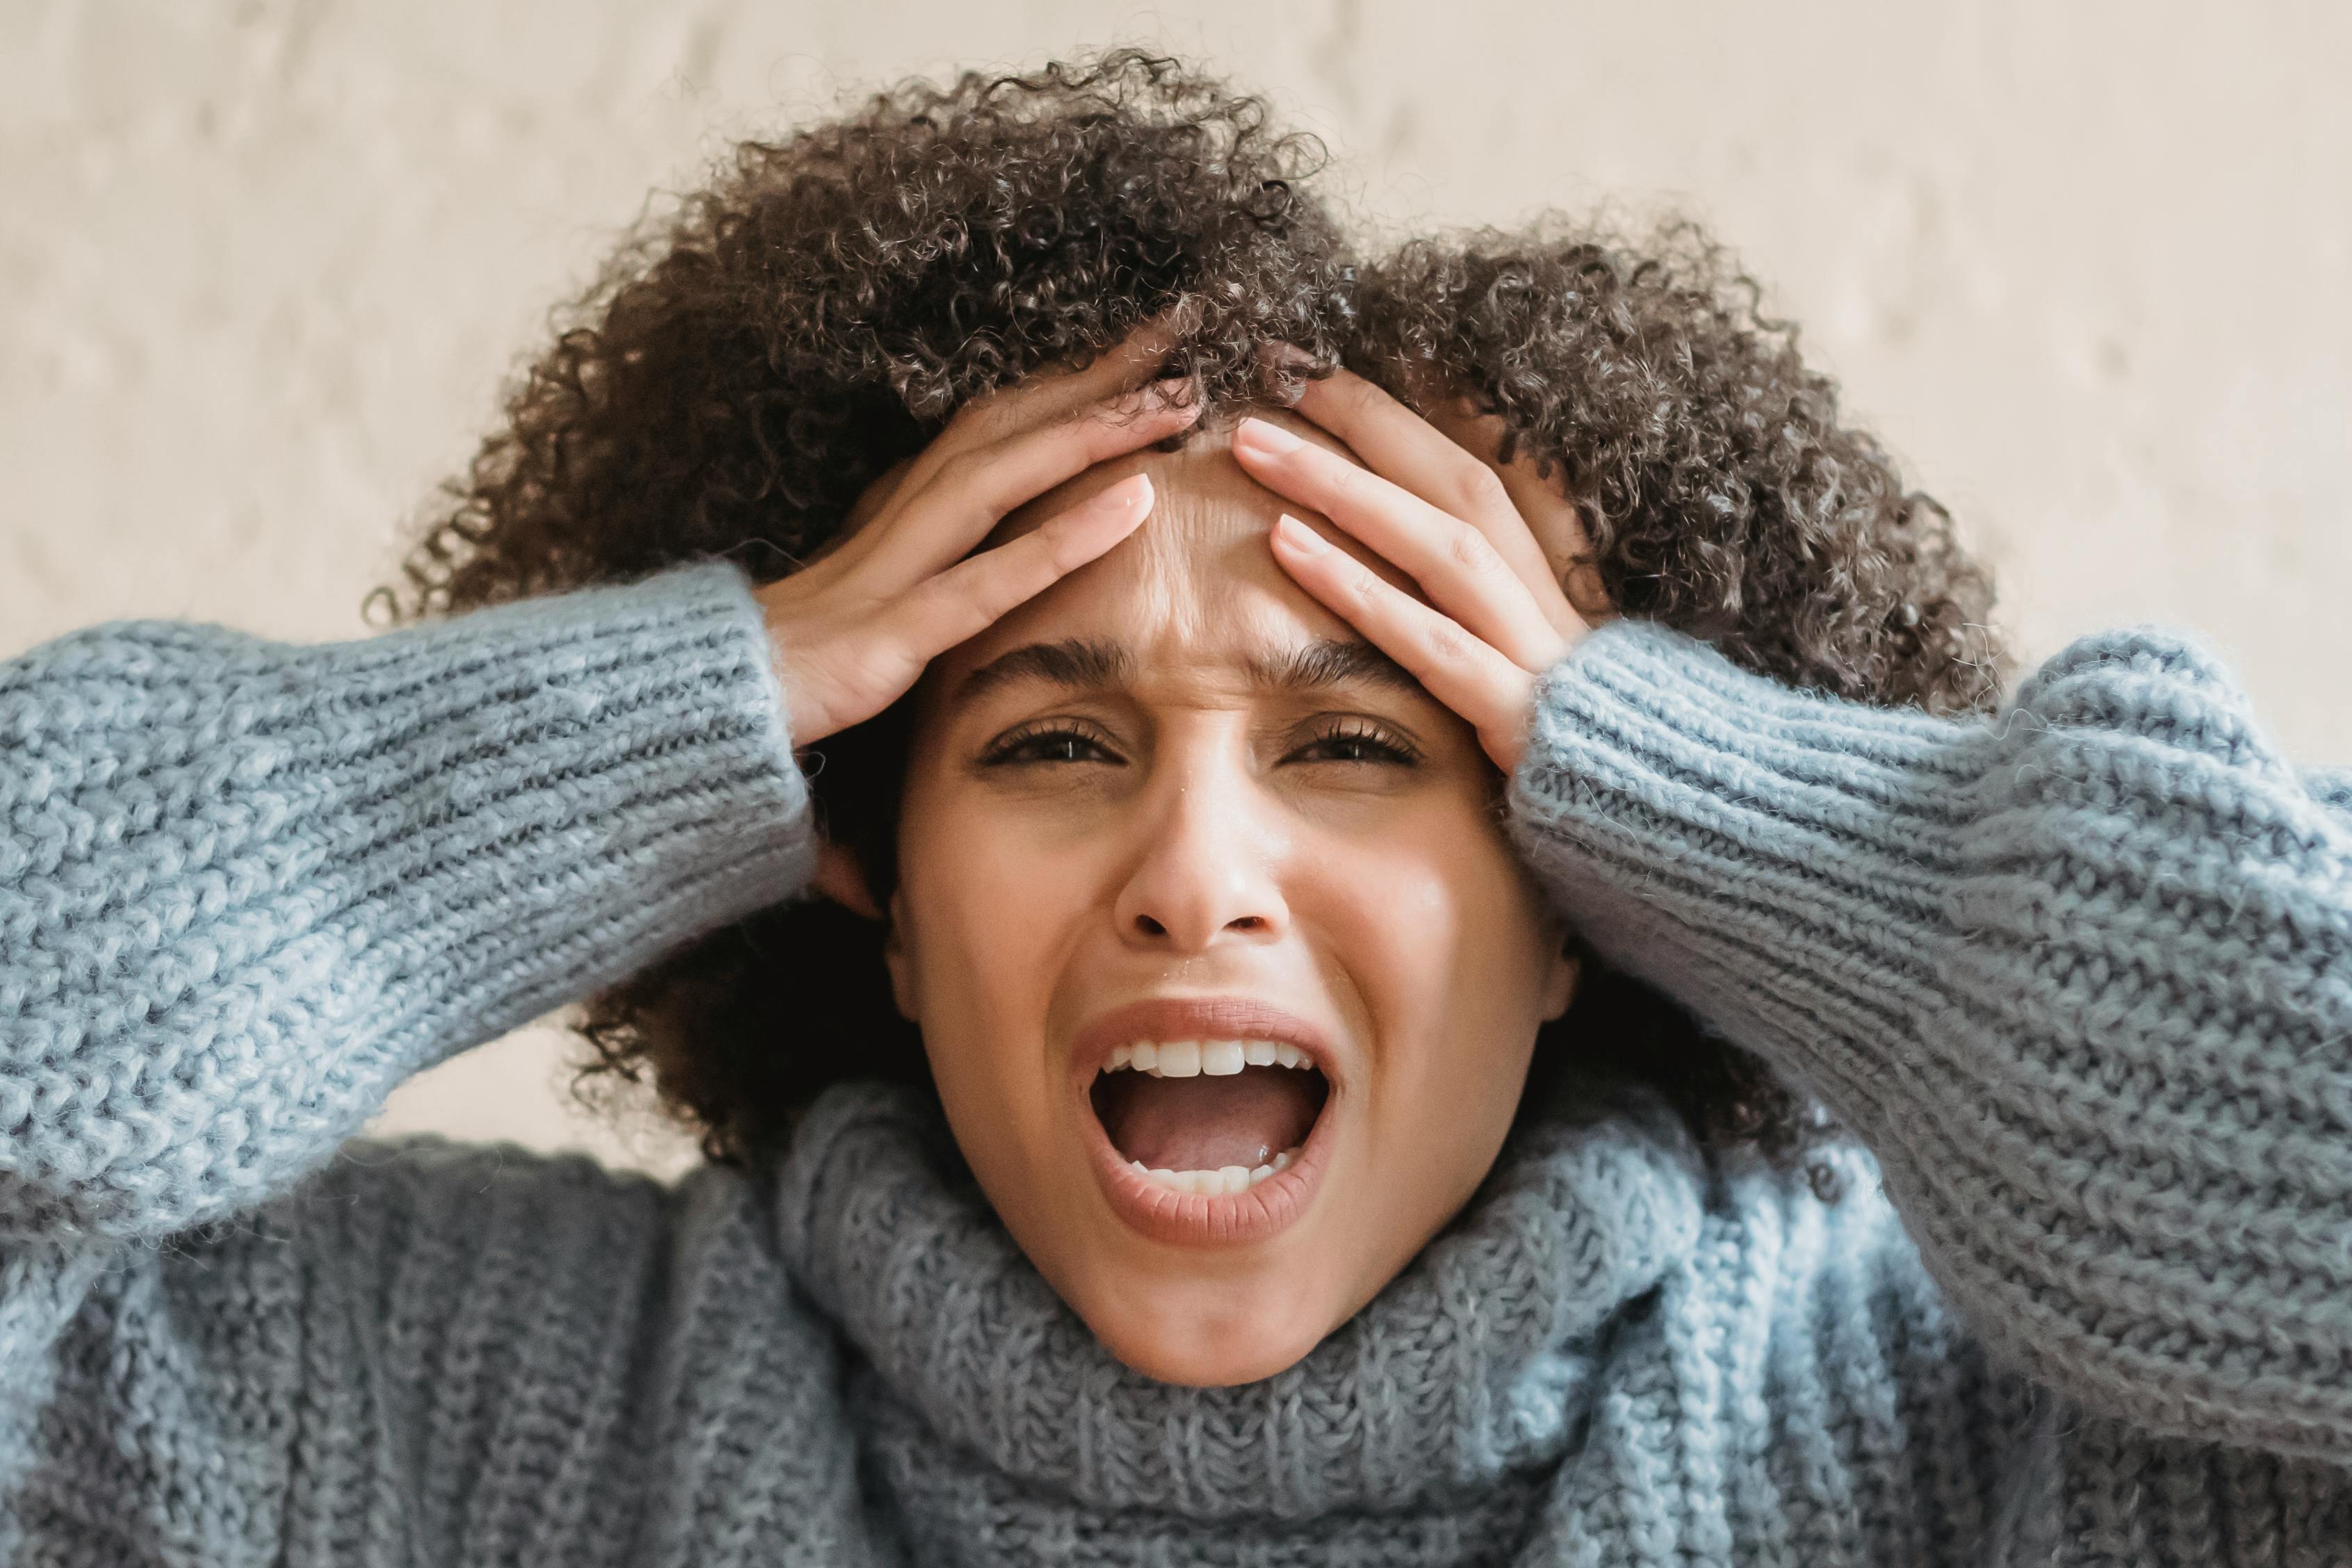 A frustrated woman | Source: Pexels